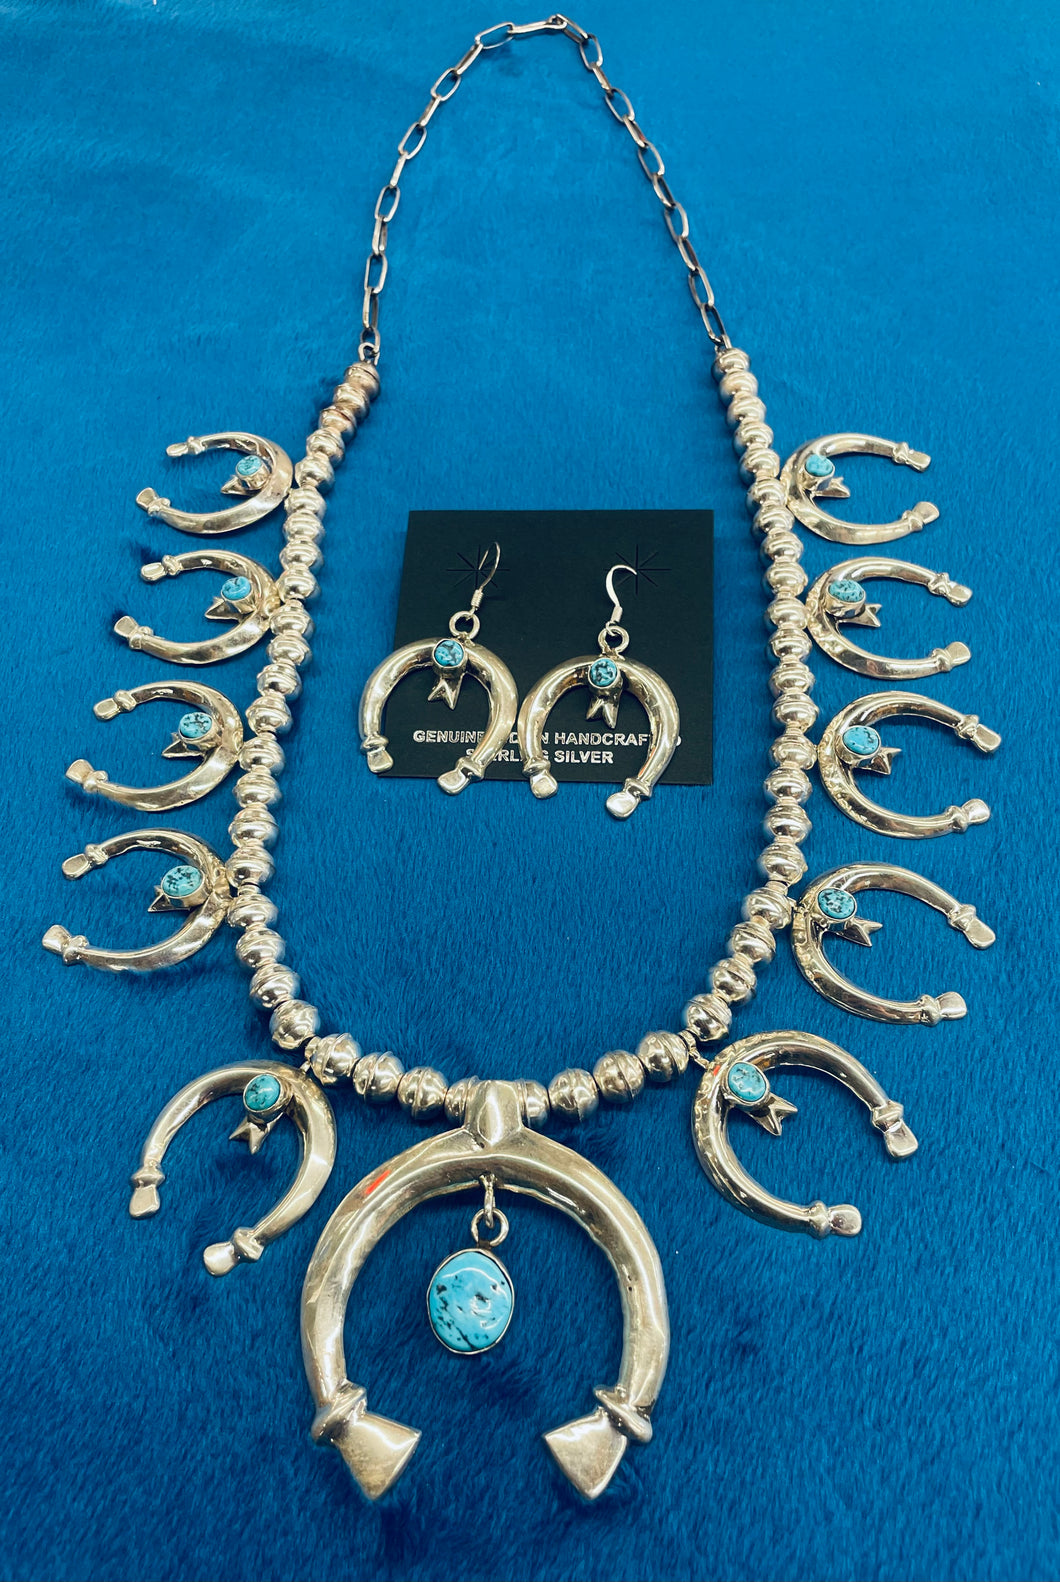 Sterling Silver and Turquoise Squash Blossom Necklace with Matching Earrings